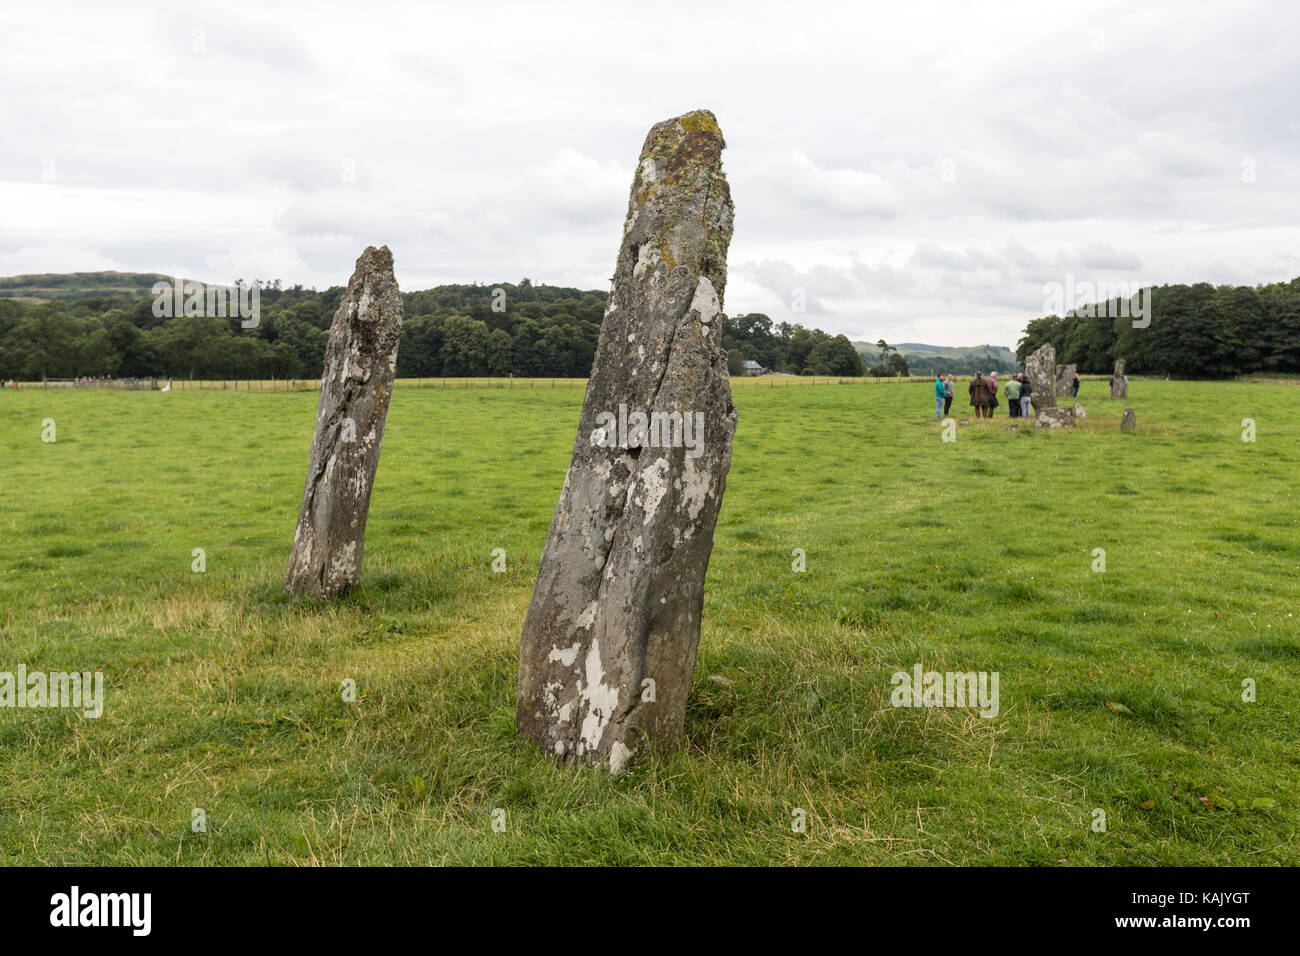 Nether largie standing stones, Kilmartin, Argyll and bute, Ecosse, Royaume-Uni Banque D'Images